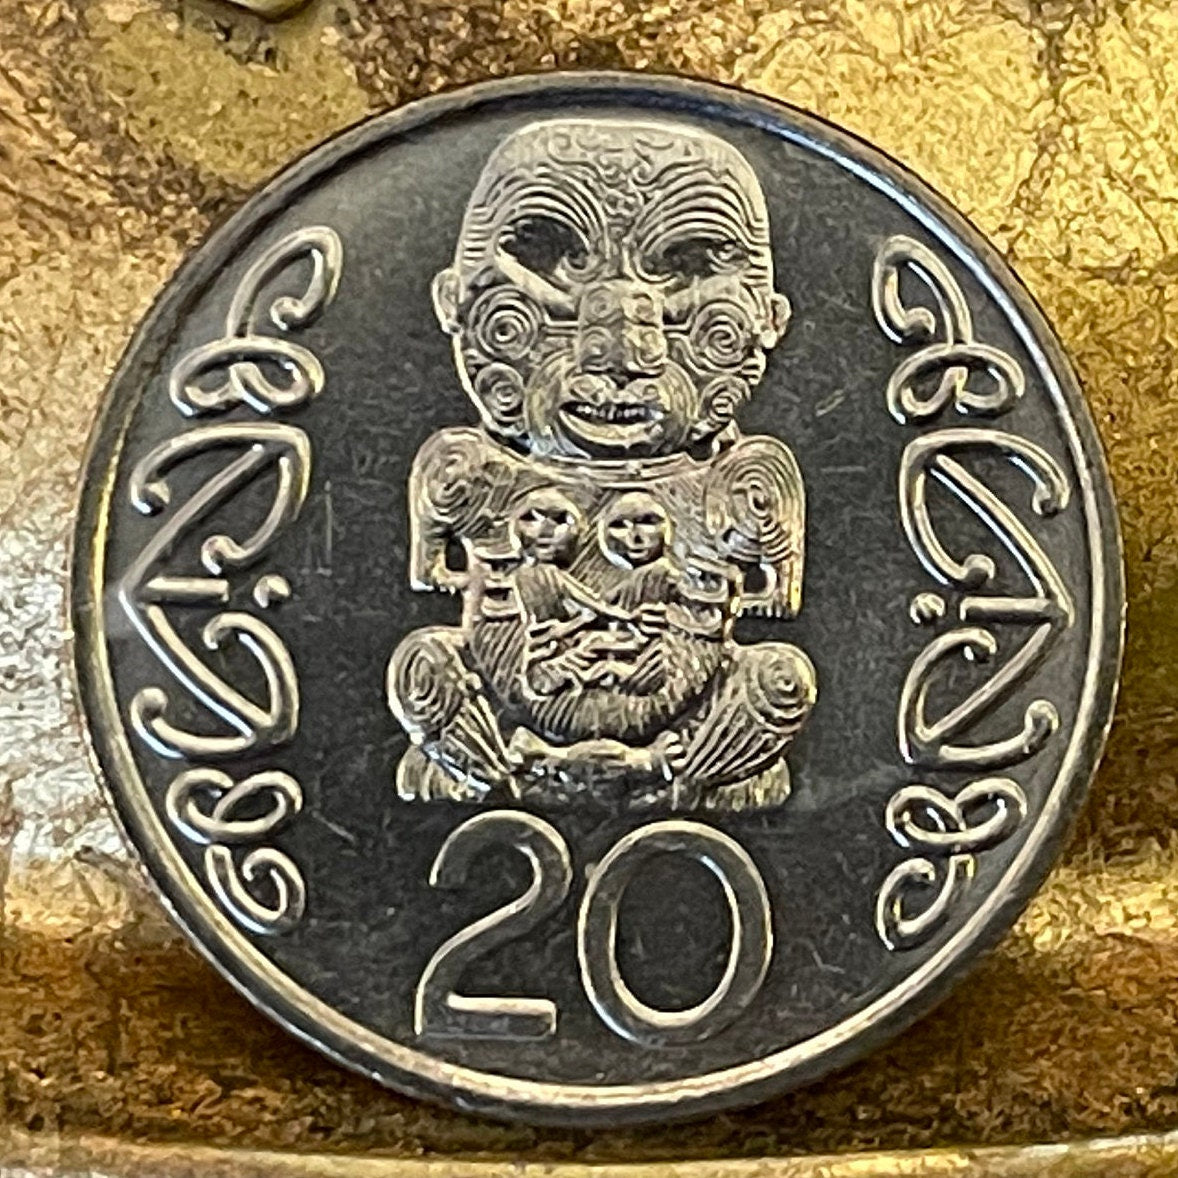 Chief Pūkākī and Two Sons 20 Cents New Zealand Authentic Coin Money for Jewelry and Craft Making (Maori Woodcarving) (Te Arawa)